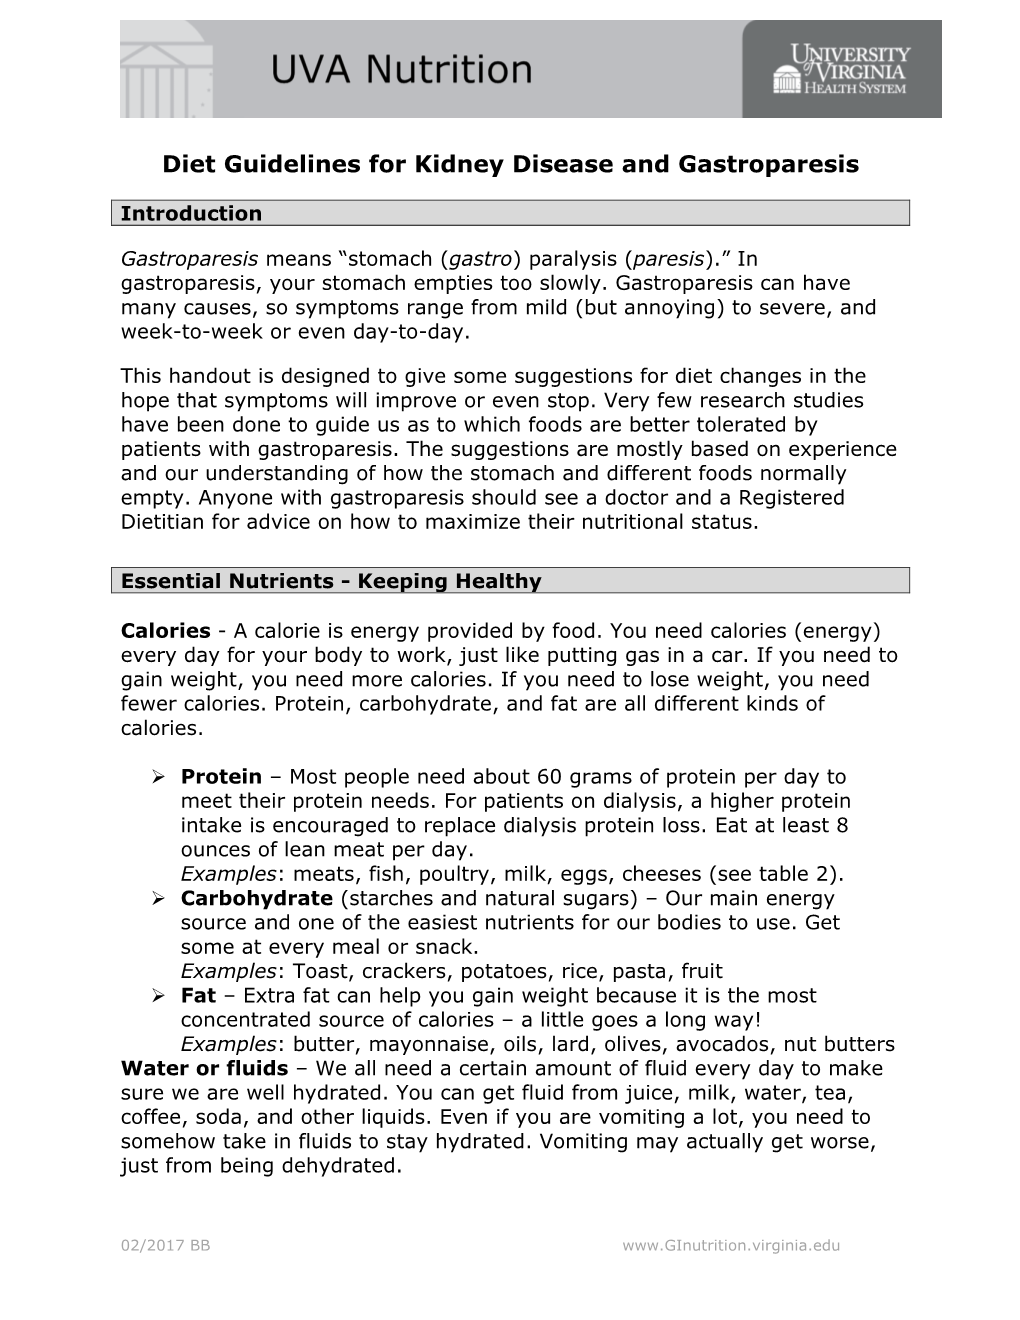 Diet Guidelines for Kidney Disease and Gastroparesis